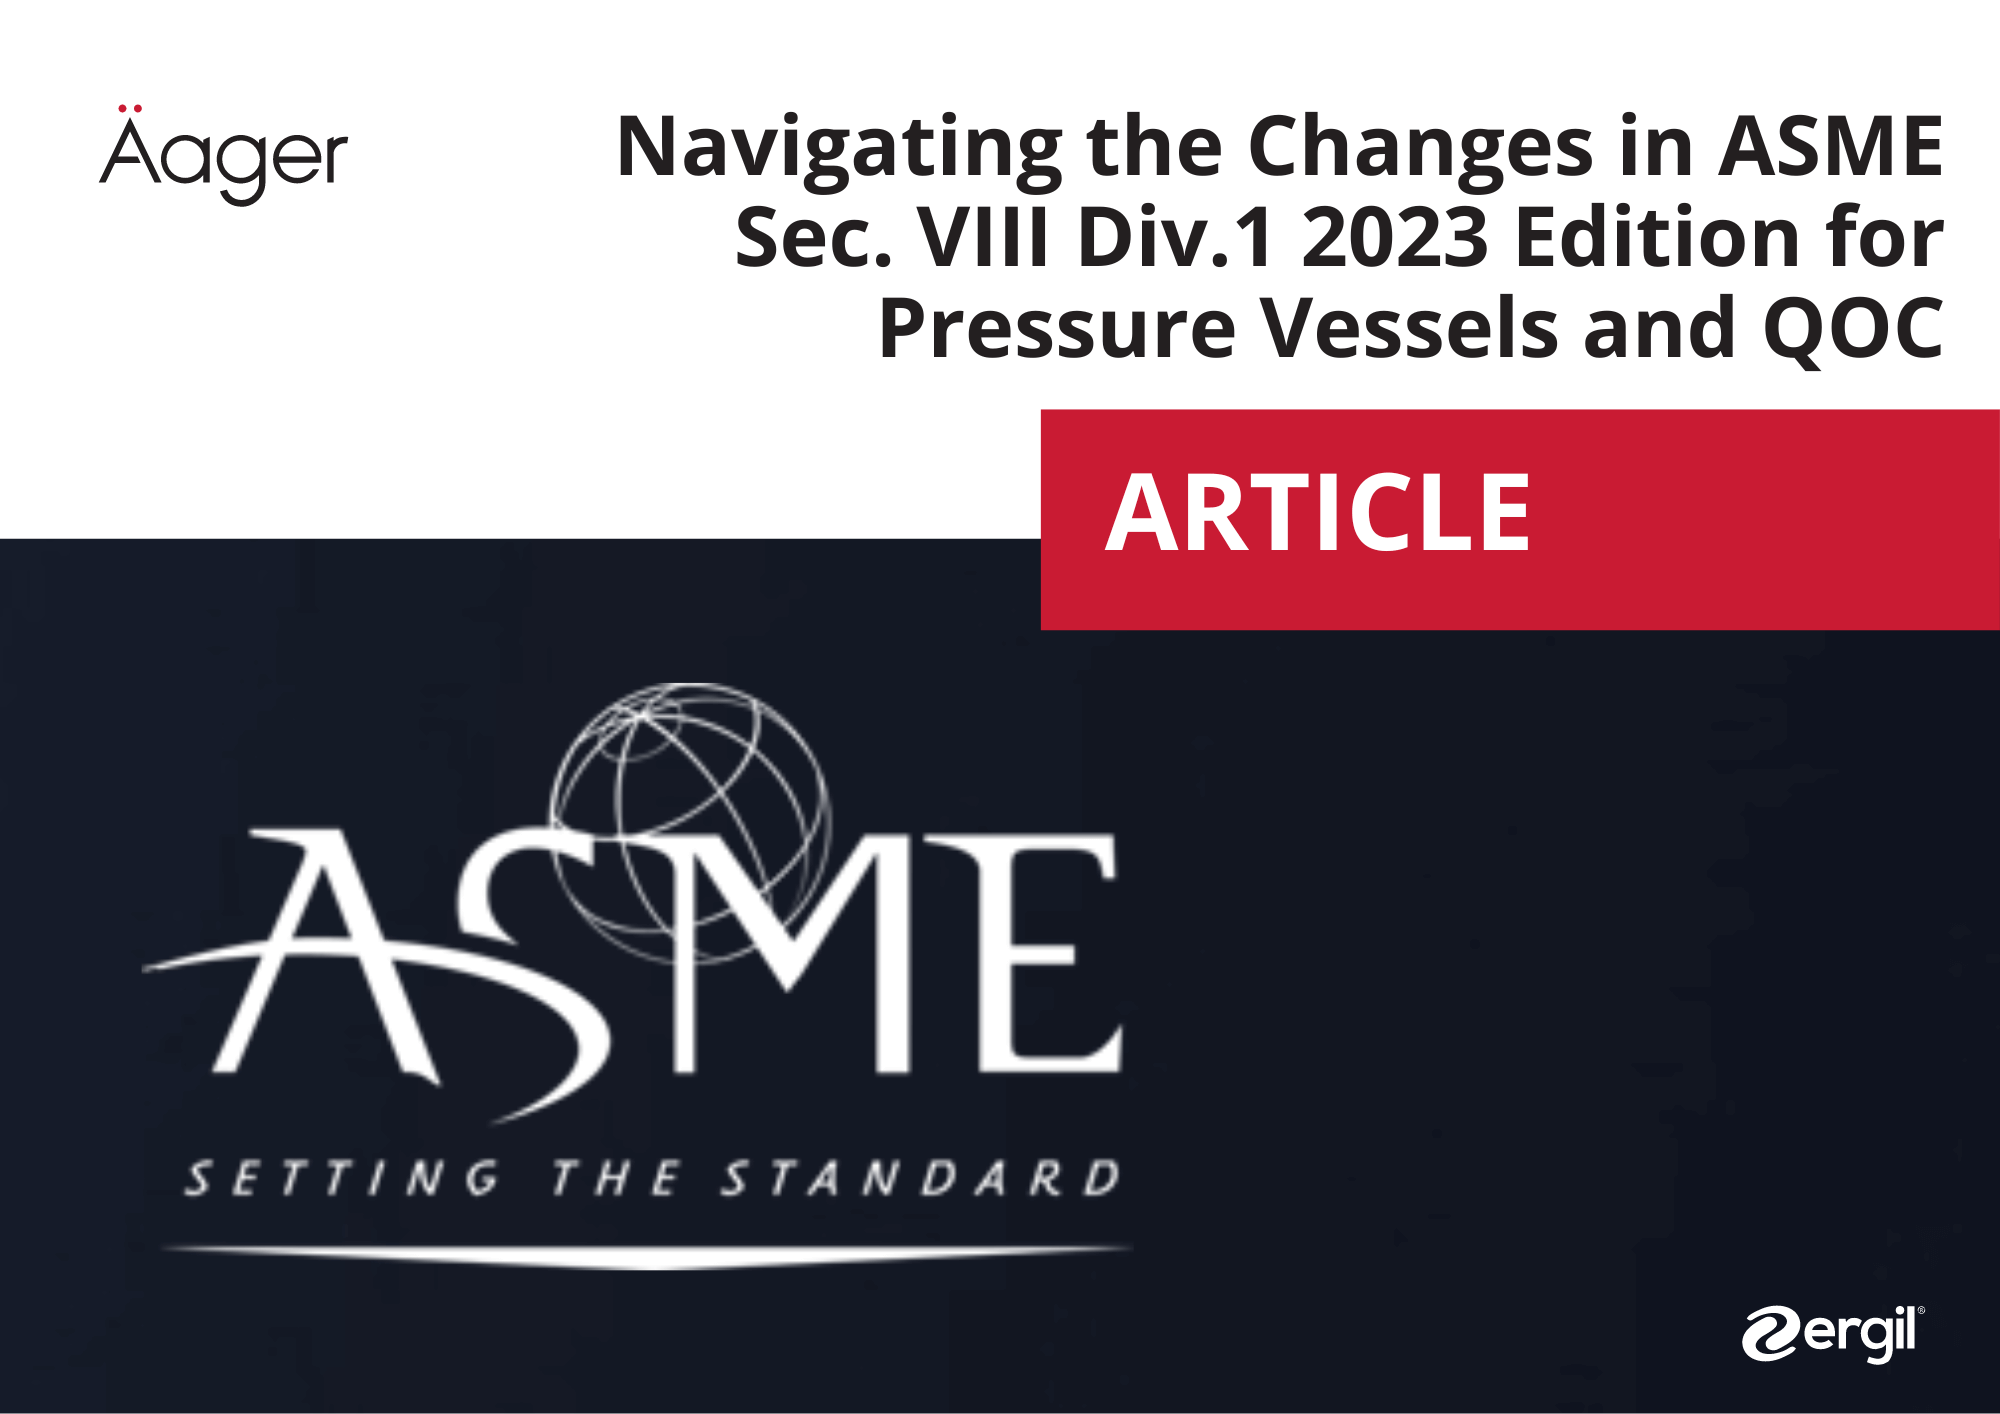 Navigating the Changes in ASME Sec. VIII Div.1 2023 Edition for Pressure Vessels and QOC 31